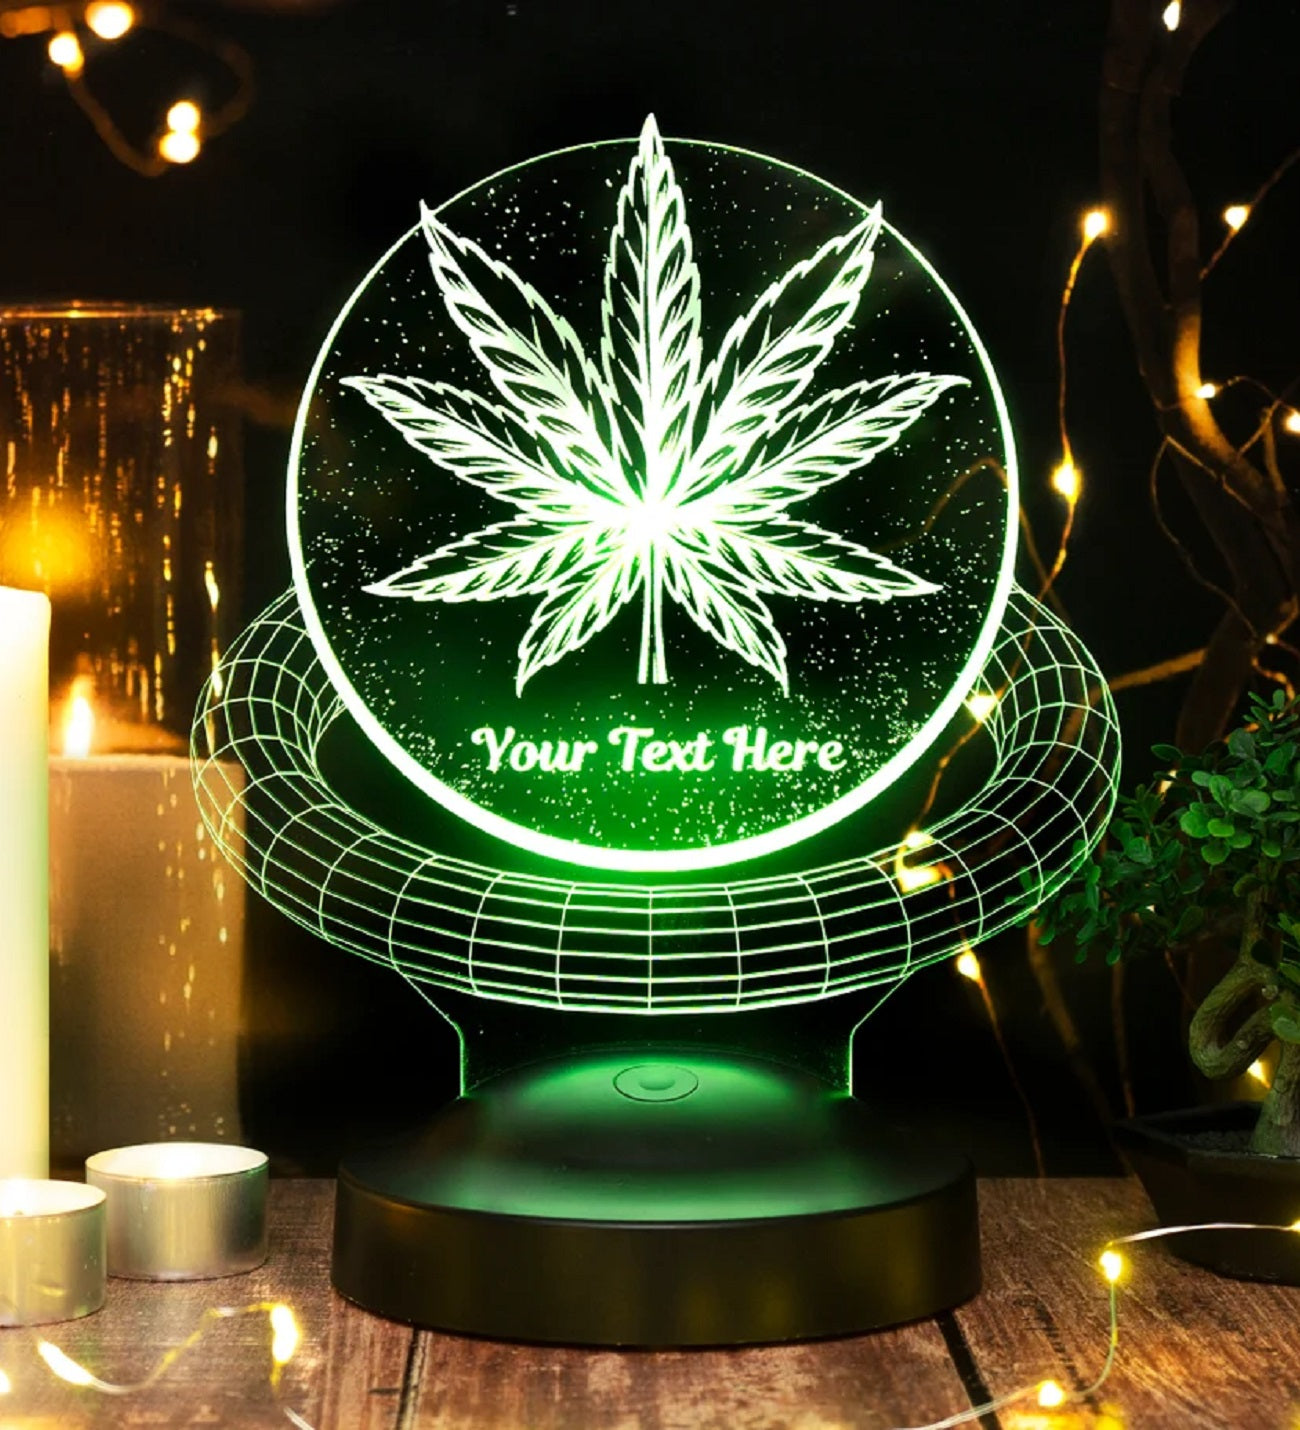 CANNABIS PERSONALIZED LAMP WITH DESIRED TEXT